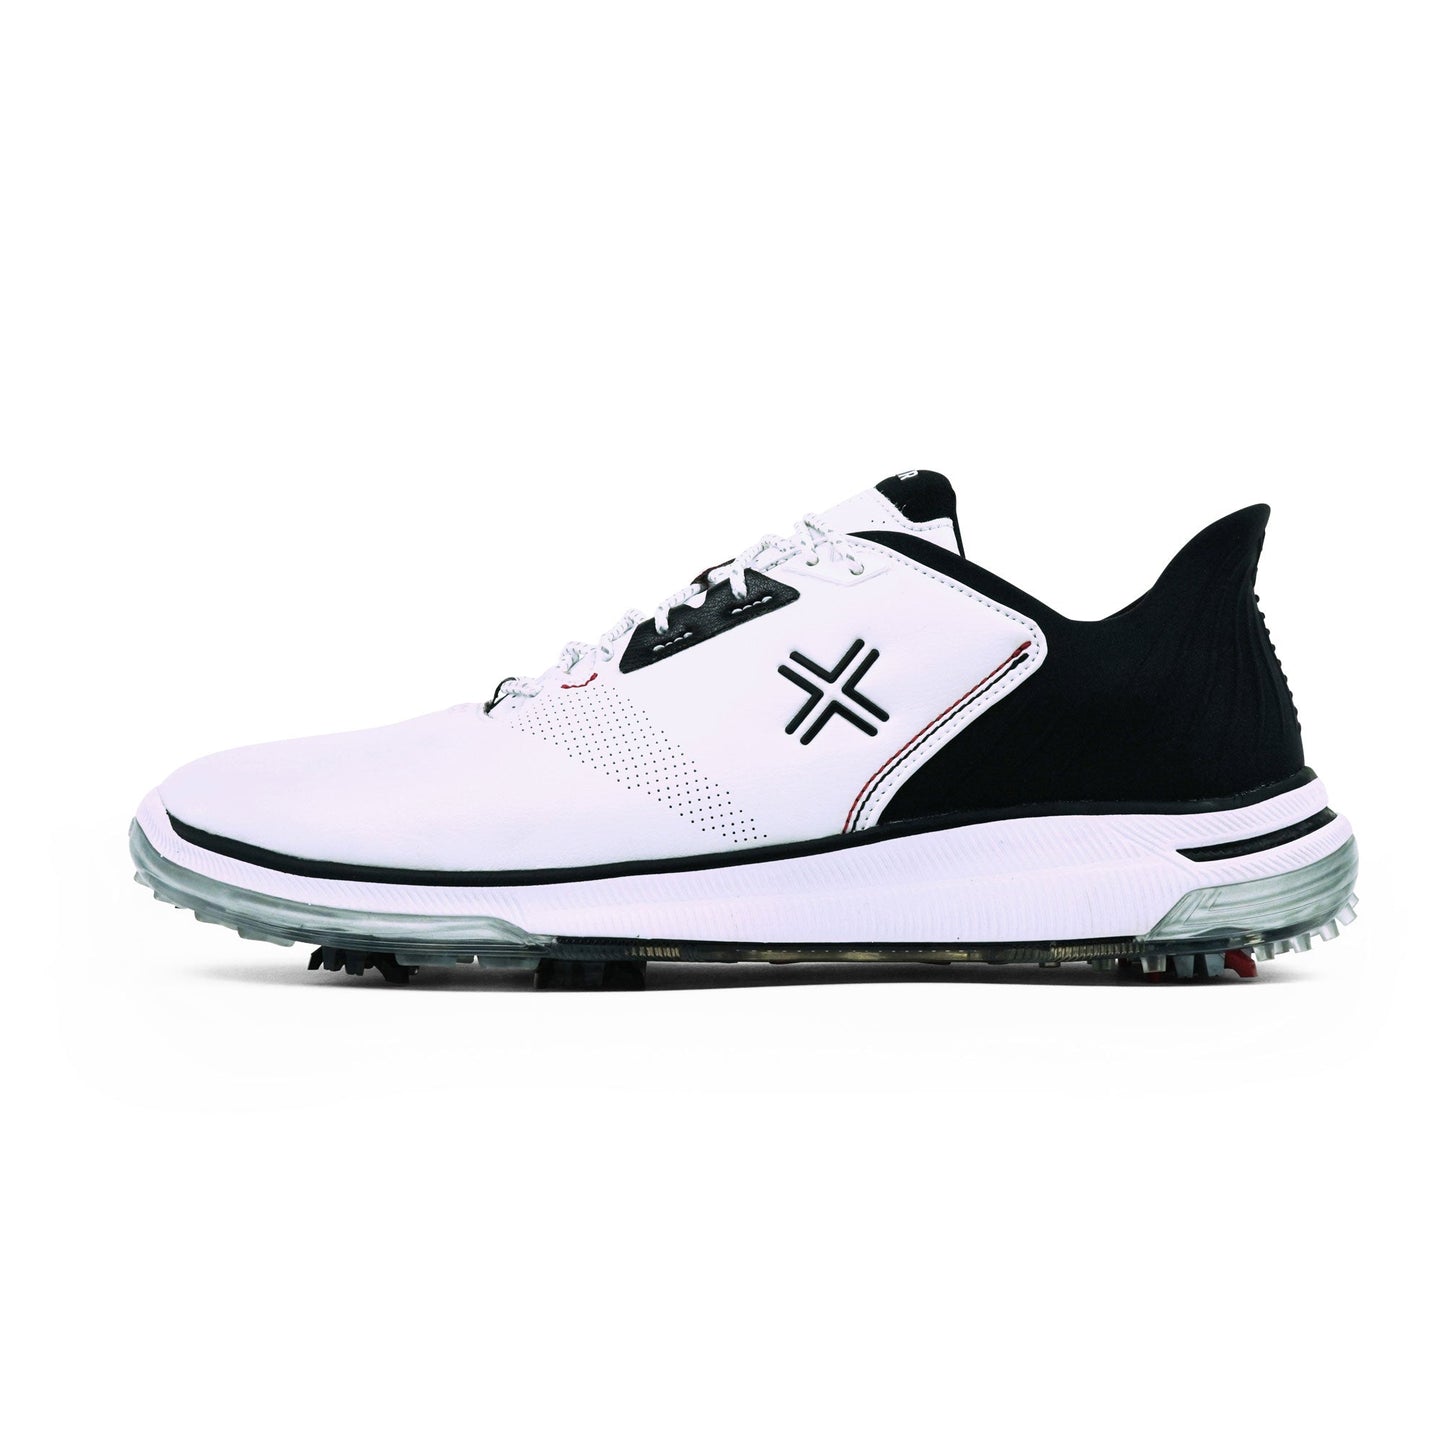 PAYNTR X 004 RS Spiked Golf Shoes